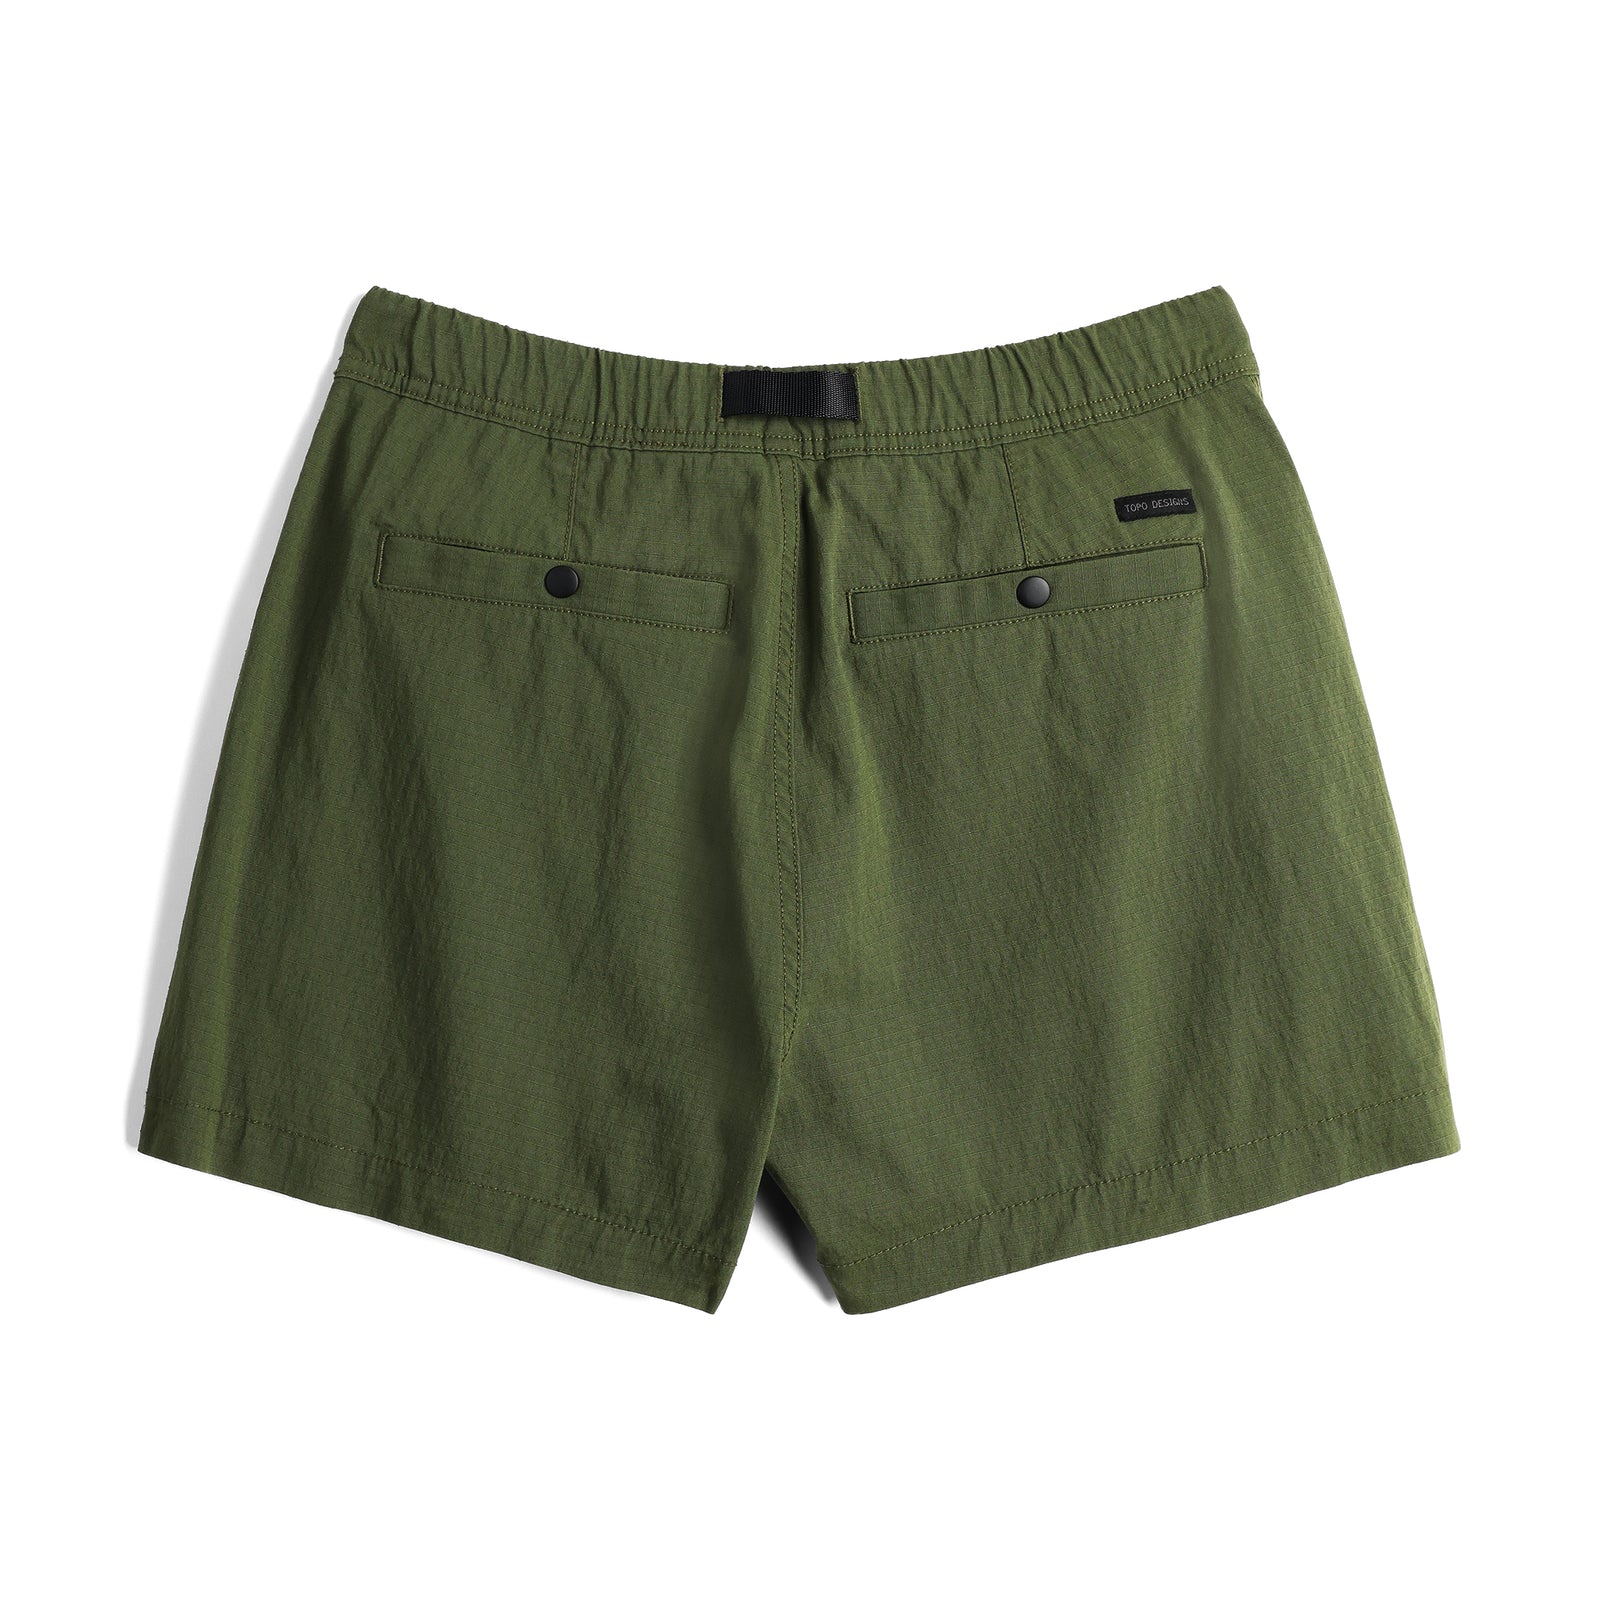 Back View of Topo Designs Mountain Short Ripstop - Women's in "Olive"